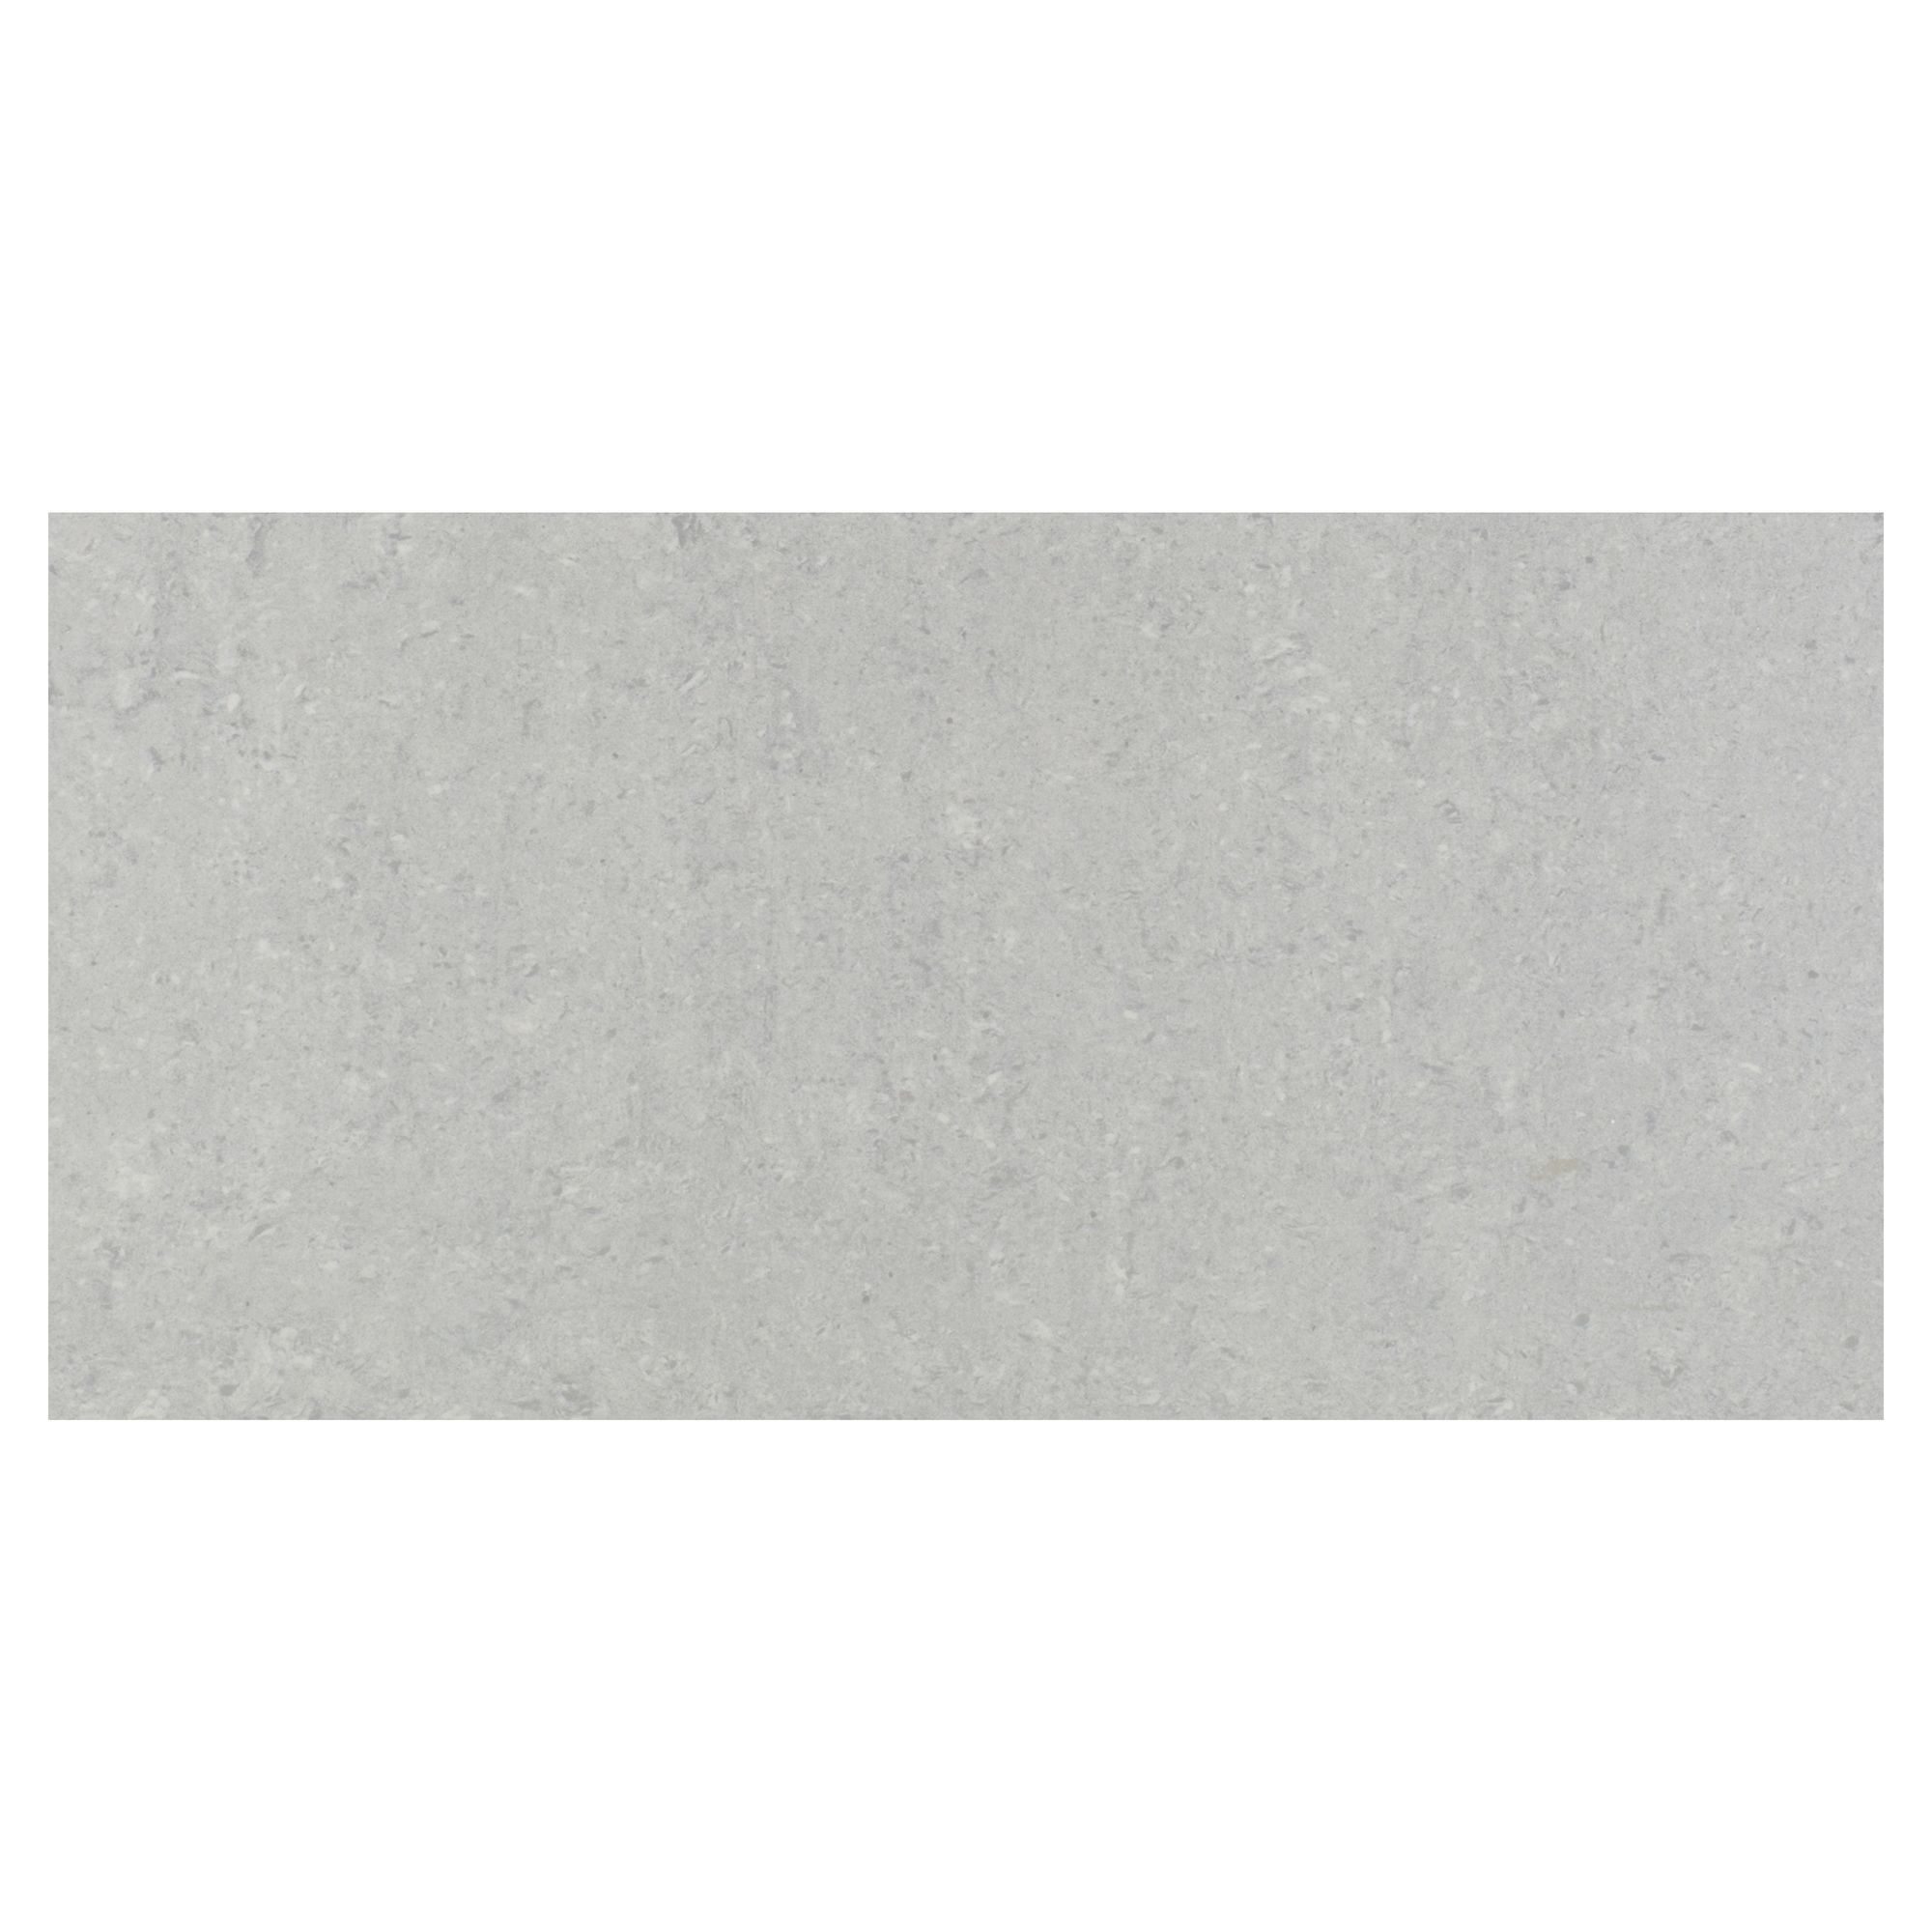 House of Mosaics Opulence Grey Gloss Speckled Stone effect Porcelain Indoor Wall & floor Tile, Pack of 5, (L)600mm (W)300mm